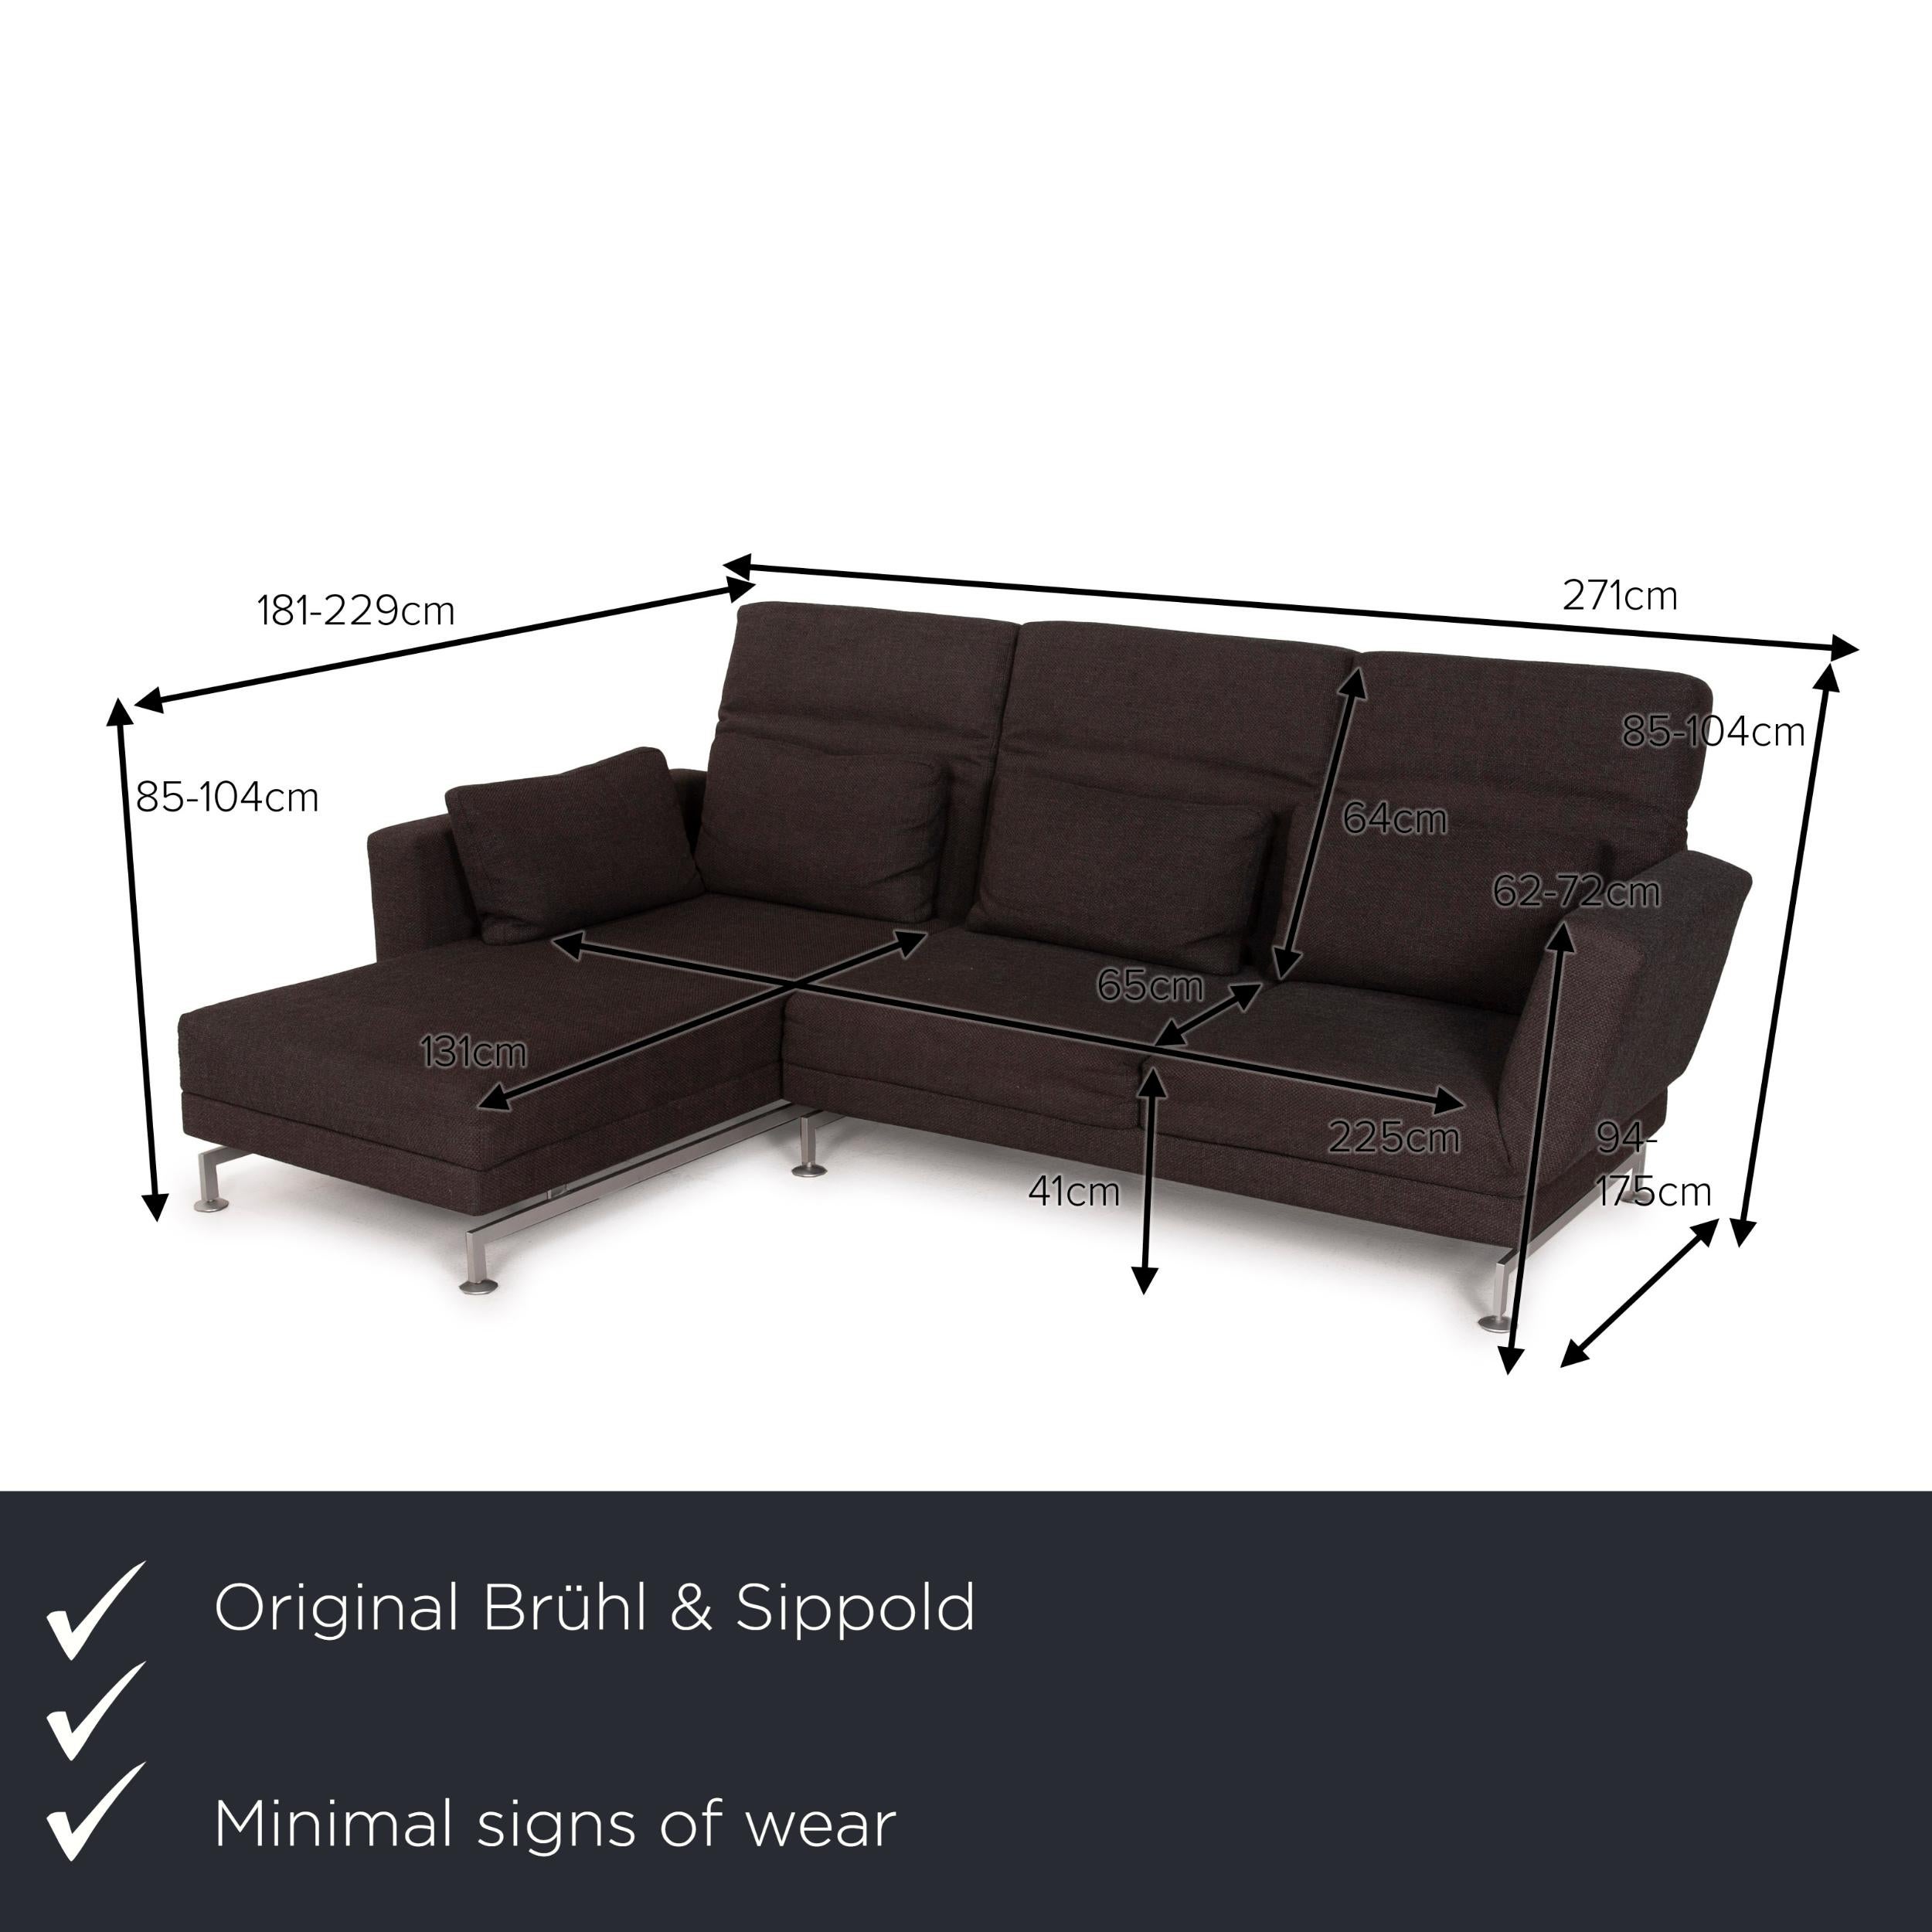 We present to you a Brühl & Sippold Moule fabric sofa brown corner sofa function relaxation.
  
 

 Product measurements in centimeters:
 

 depth: 180
 width: 181
 height: 85
 seat height: 41
 rest height: 62
 seat depth: 131
 seat